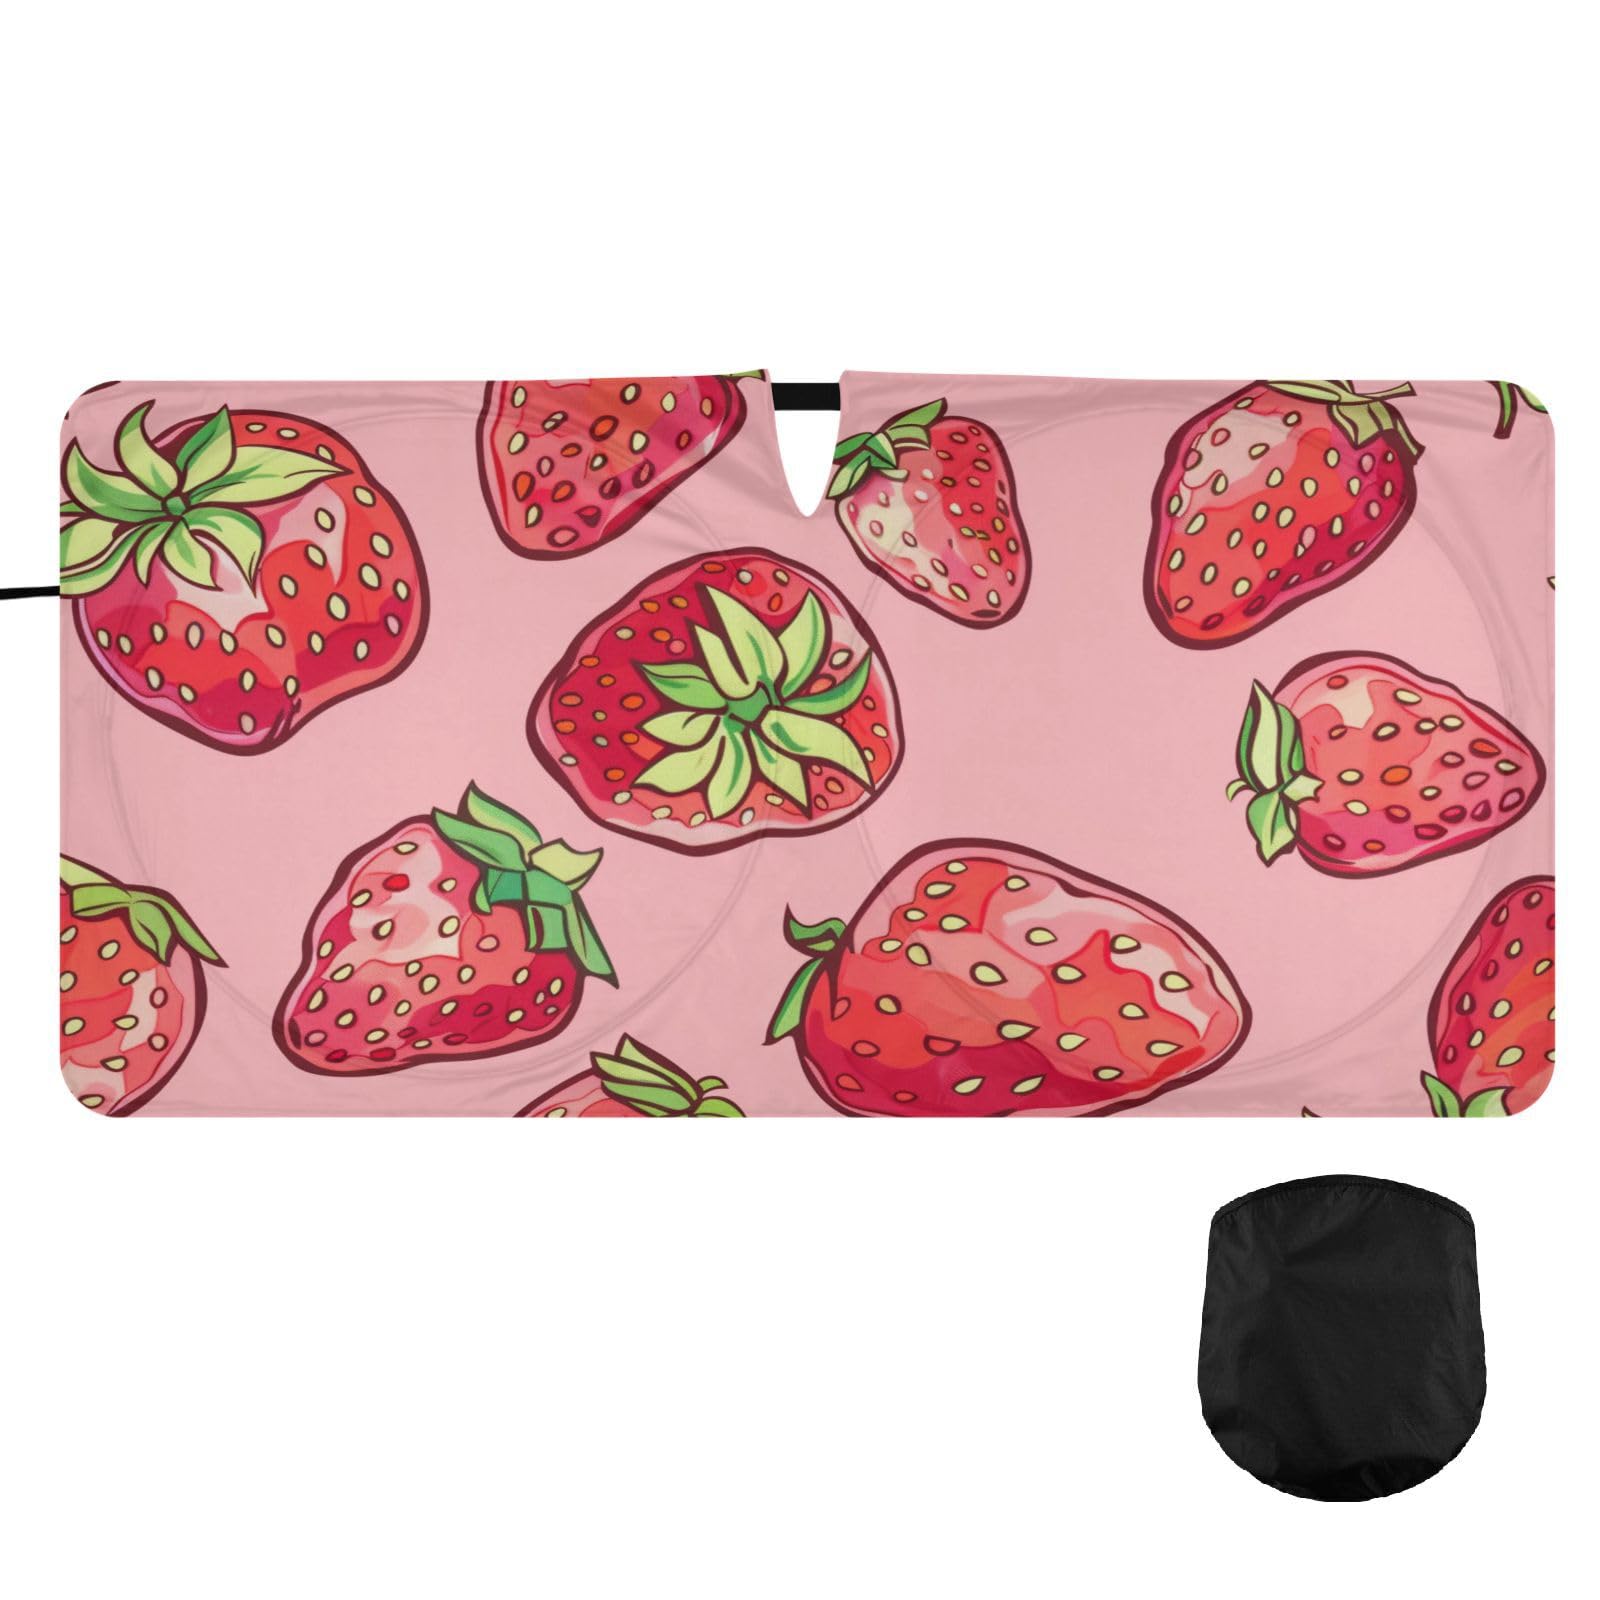 Oarencol Windshield Sun Shade Strawberrys Cute Fruit Pink Car Sunshade for Auto Truck SUV, Sun Shield That Keeps Your Vehicle Cool, Foldable, Storage Bag 62 x 32 Zoll von Oarencol